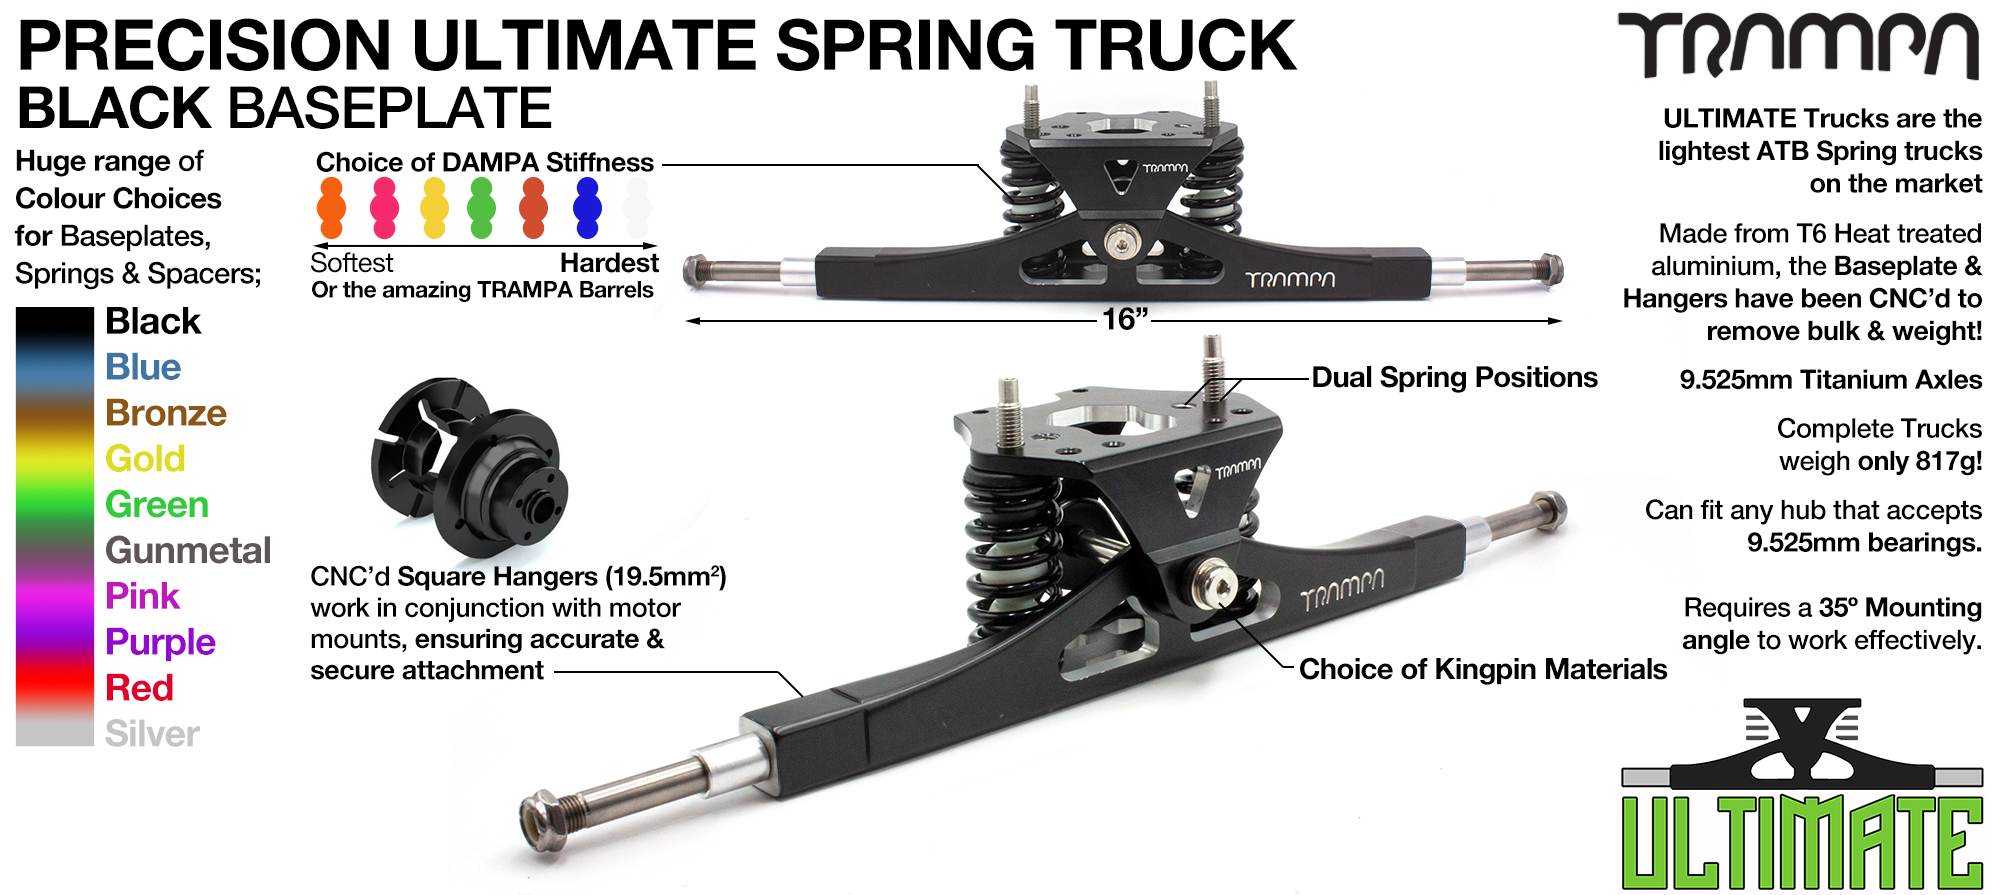 Precision CNC ULTIMATE ATB TRUCK with CNC Motor Mount fixing points, BLACK Baseplate, TITANIUM Axles & Kingpin